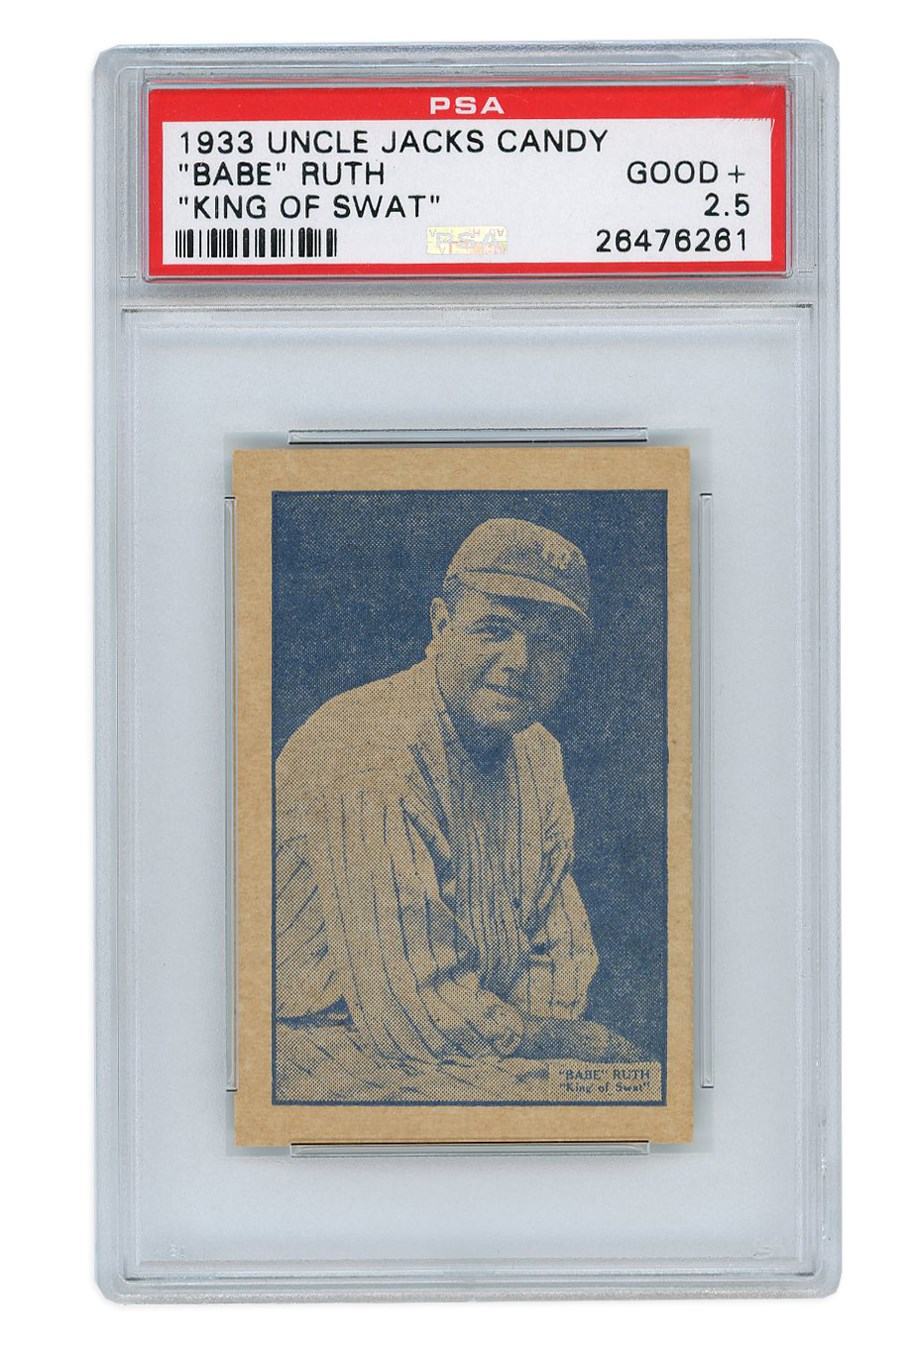 Extremely Rare 1933 Uncle Jacks Candy Babe Ruth "King of Swat" PSA GOOD+ 2.5 - Highest Graded PSA Example!